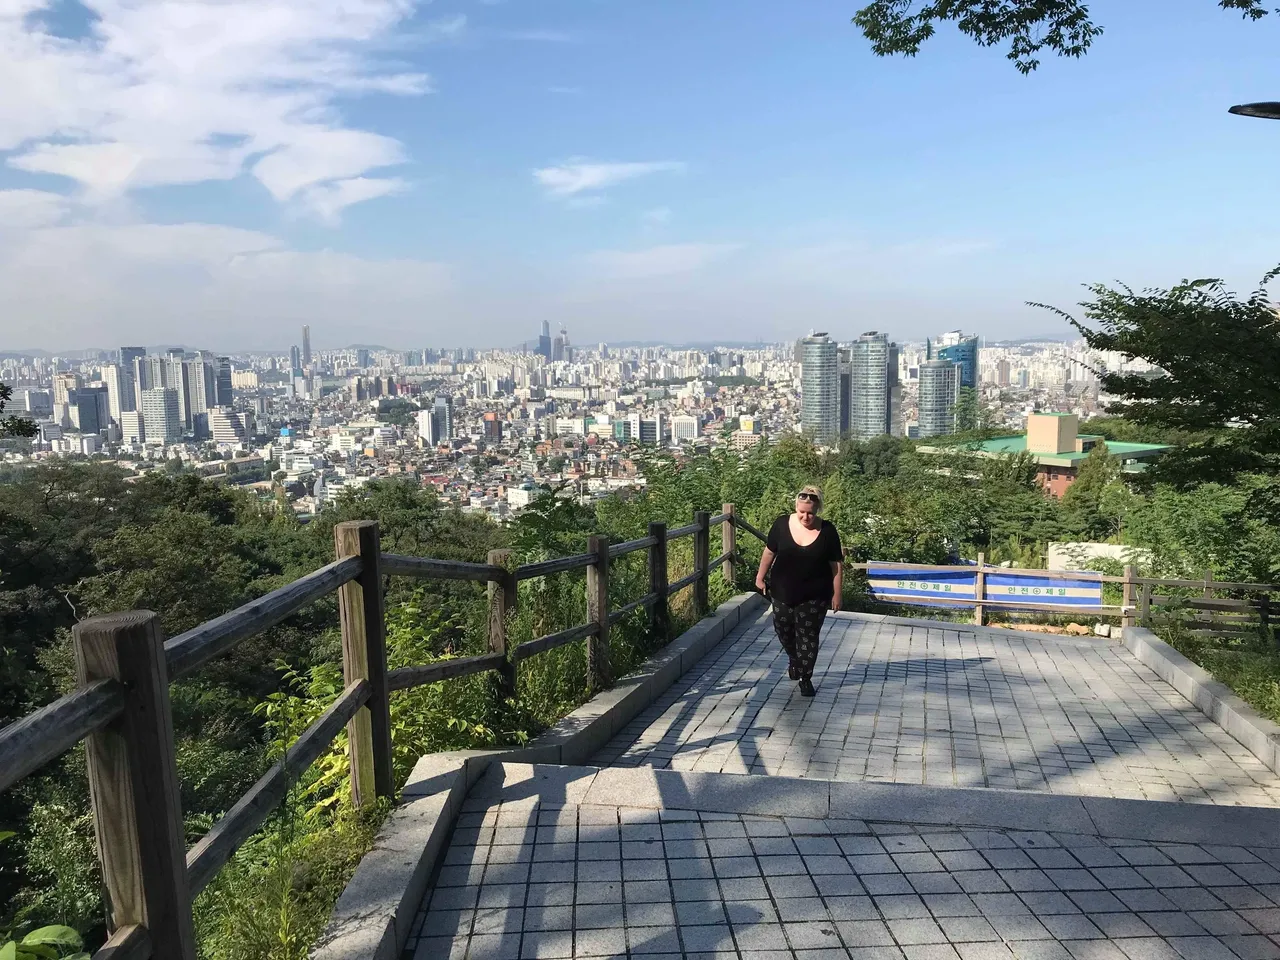 Seoul: The city that never sleeps The Travel Psychologist